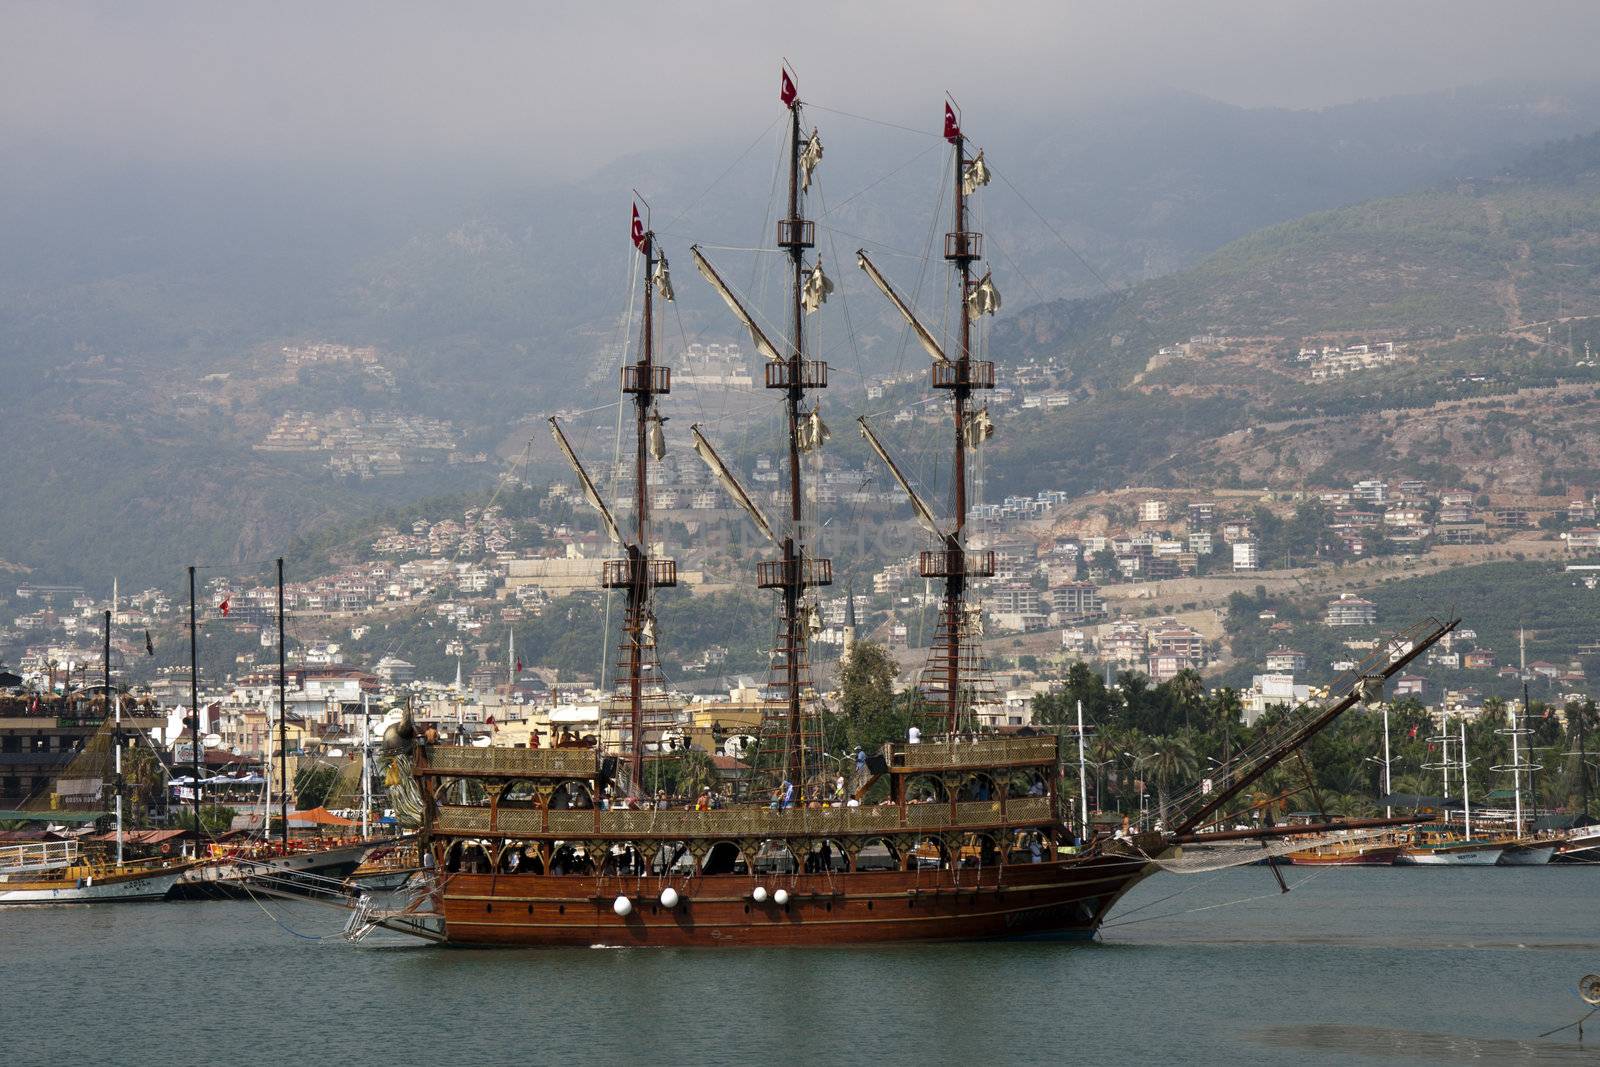 Tourist boat in Alanya Harbour, Turkey